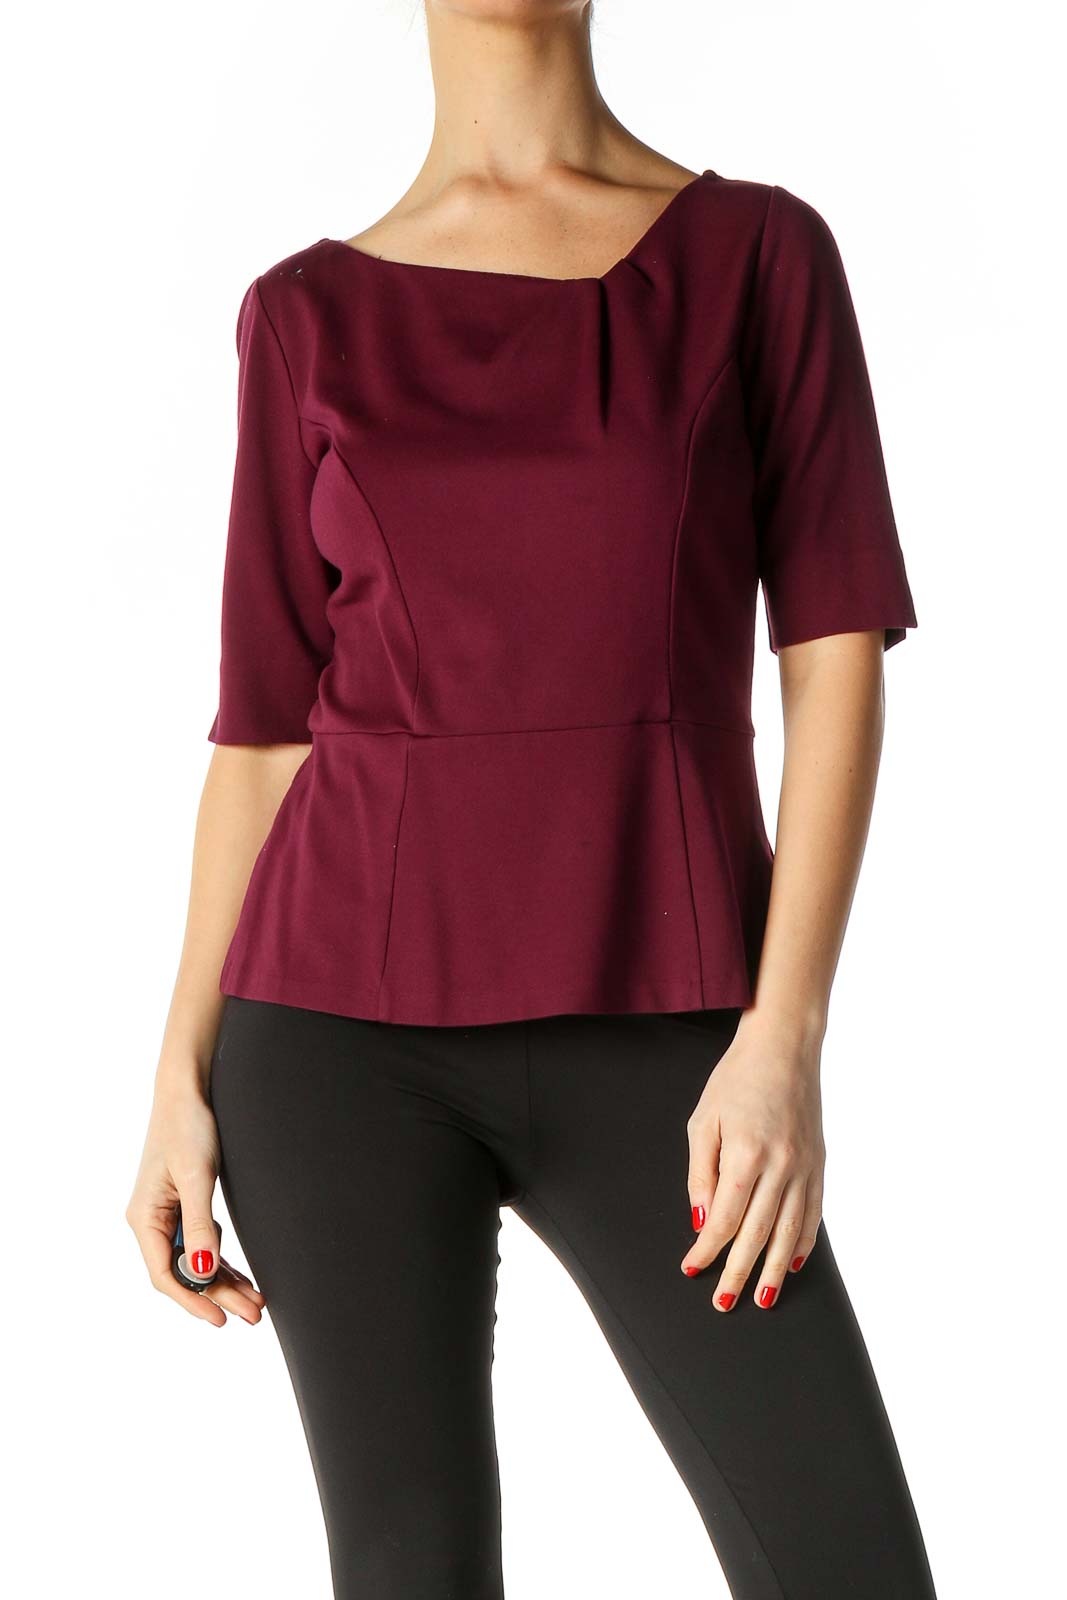 Red Solid Retro Blouse Front